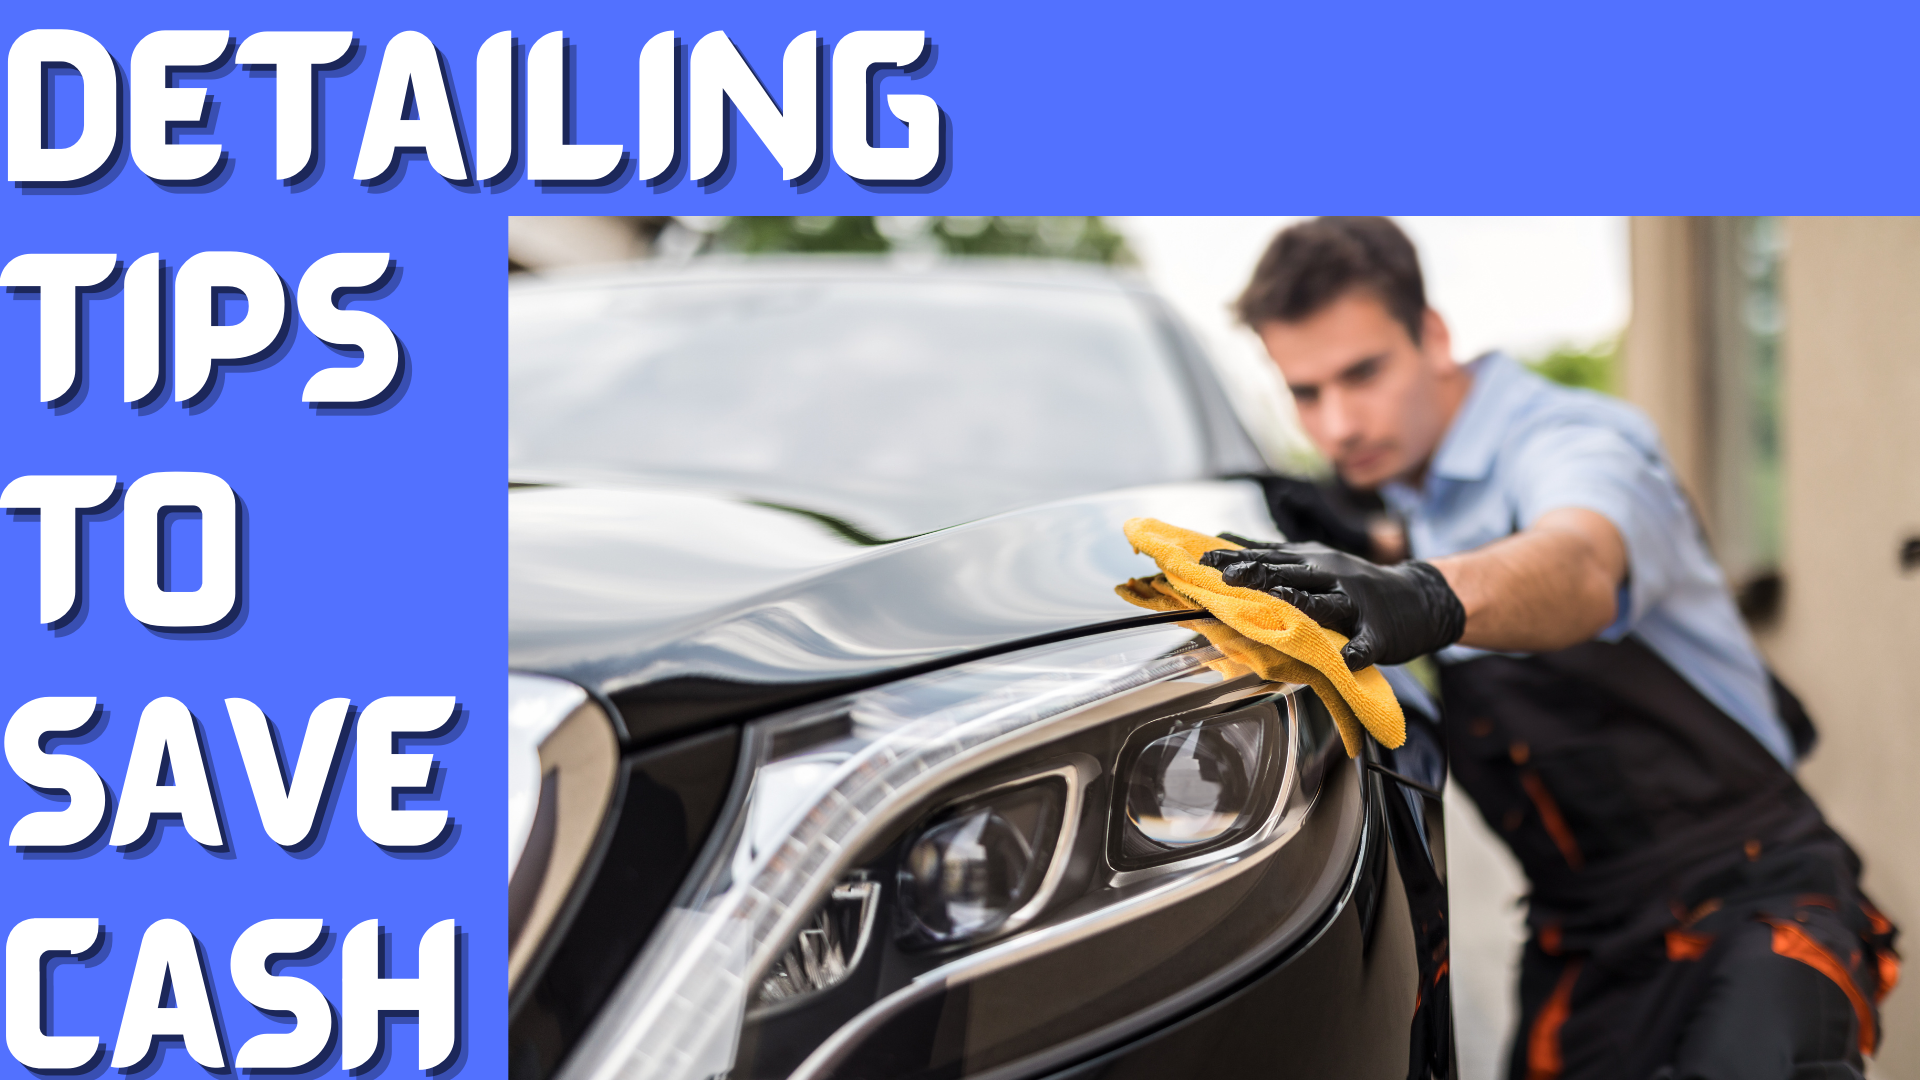 7 Truck Detailing Tips To Save You Money